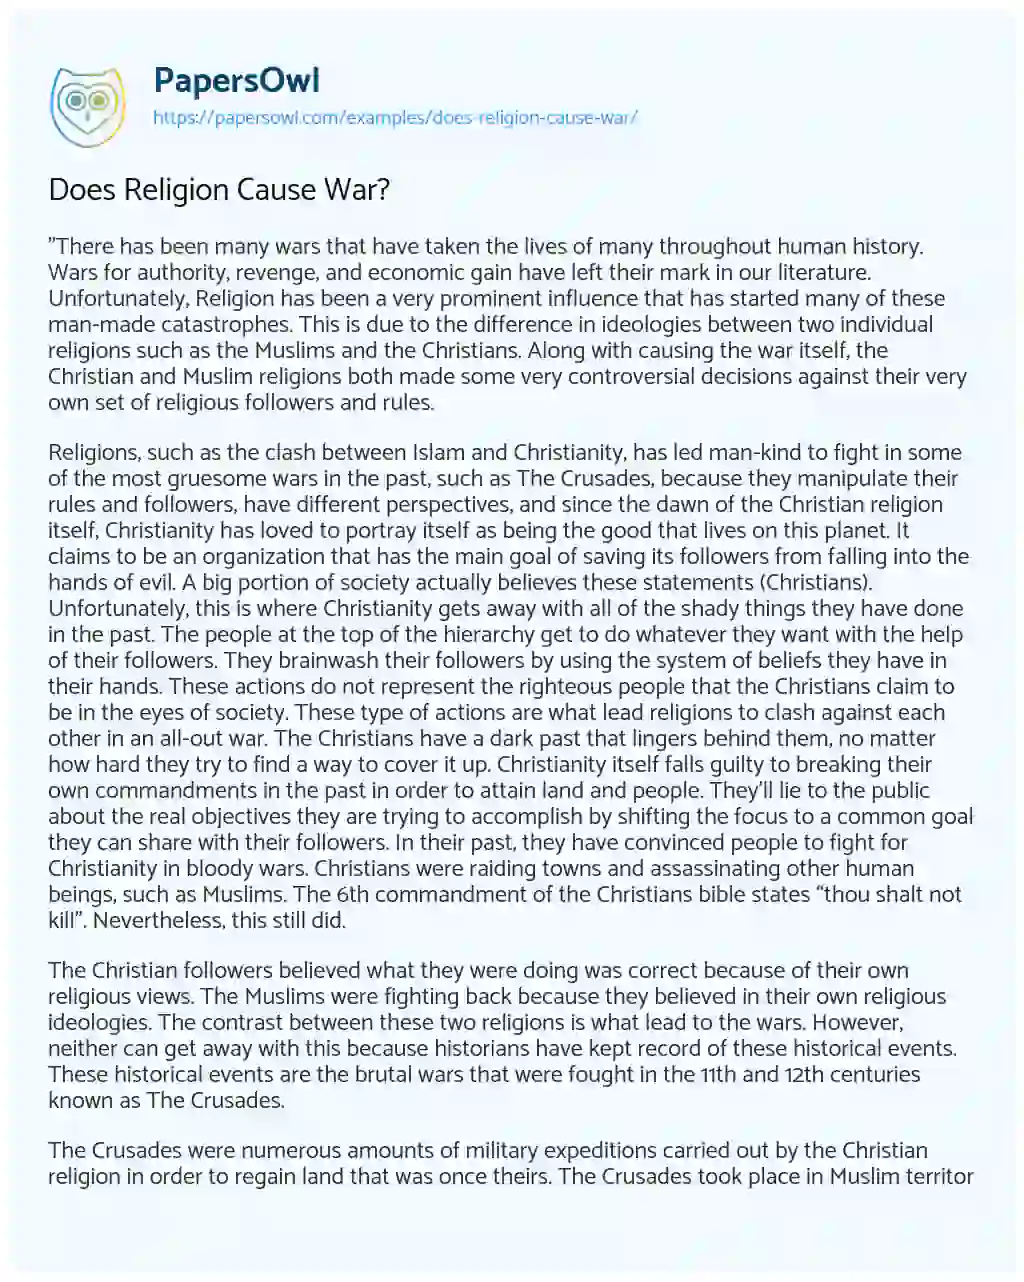 Does Religion Cause War? essay